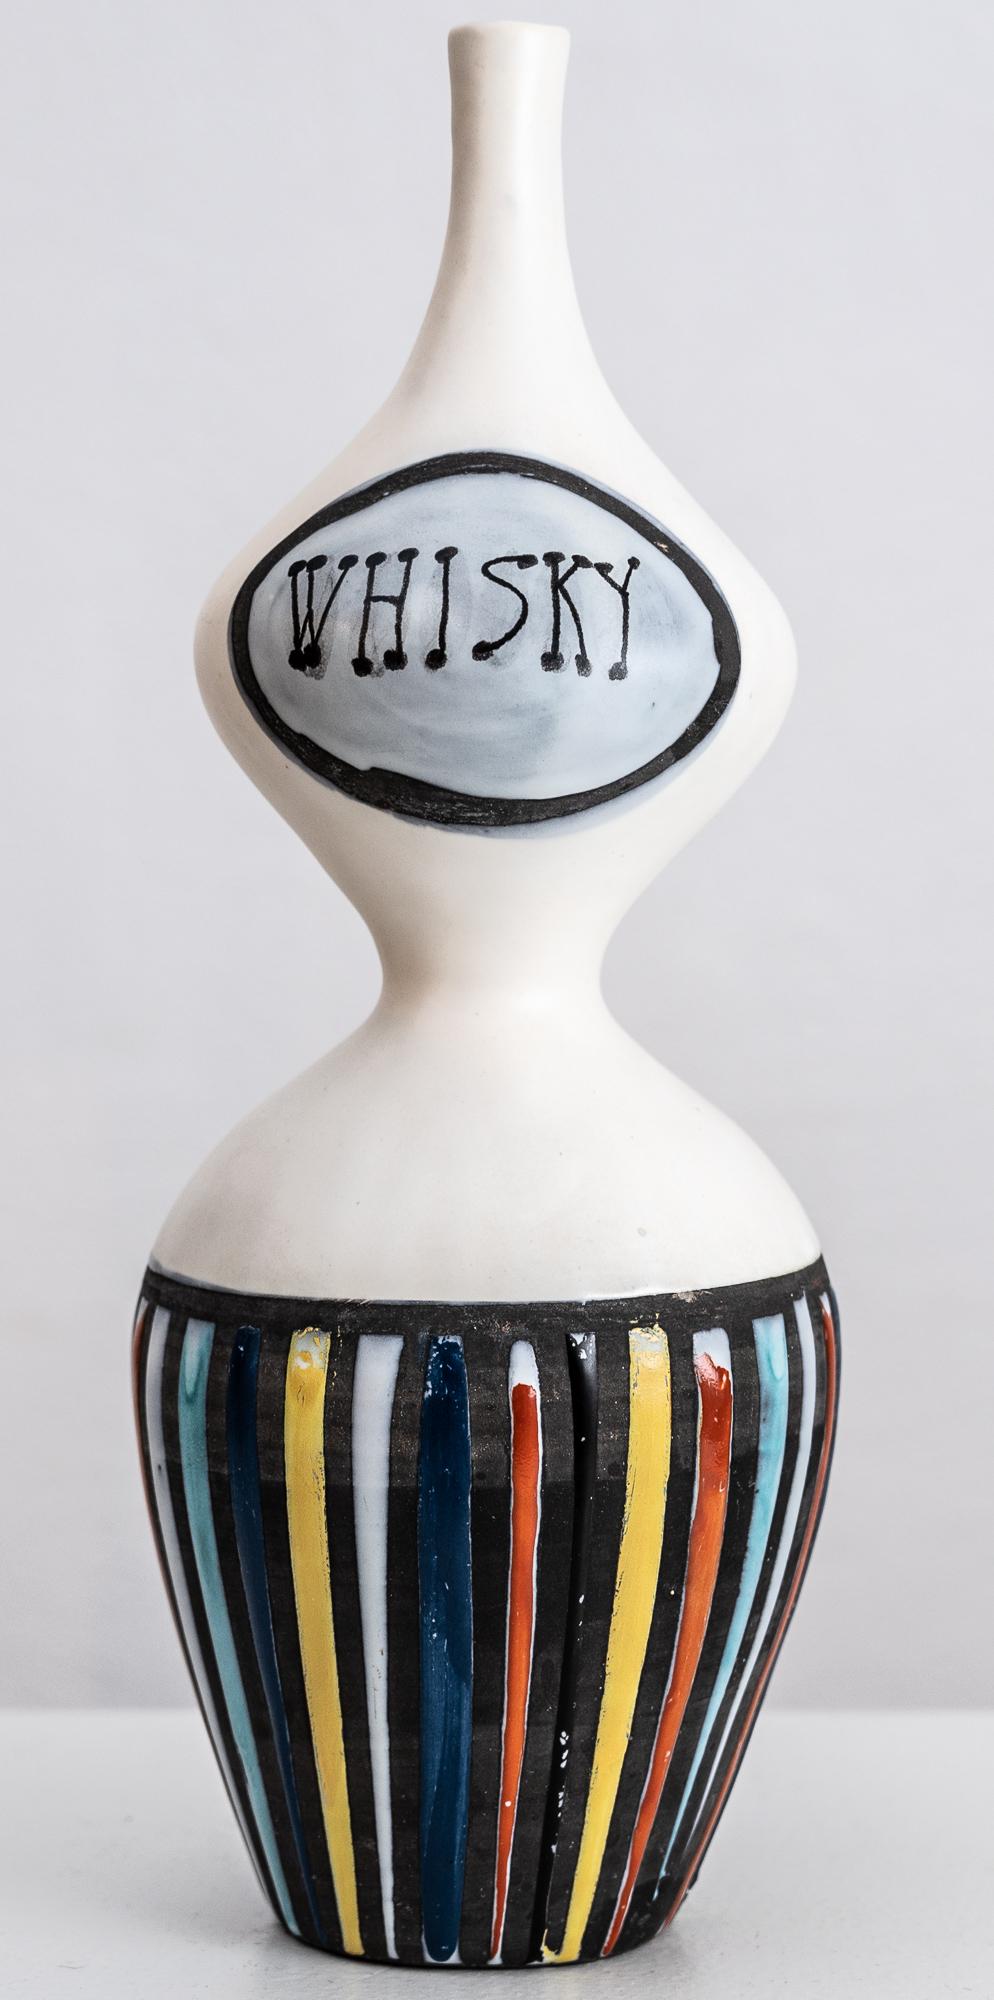 Roger Capron anthropomorphic shaped ceramic whisky bottle in pyjama stripes. Signed to the underside “Capron Vallauris 39A”

Vallauris France, circa 1950

Roger Capron was born in Vincennes, France on September 4, 1922. Interested in drawing, he